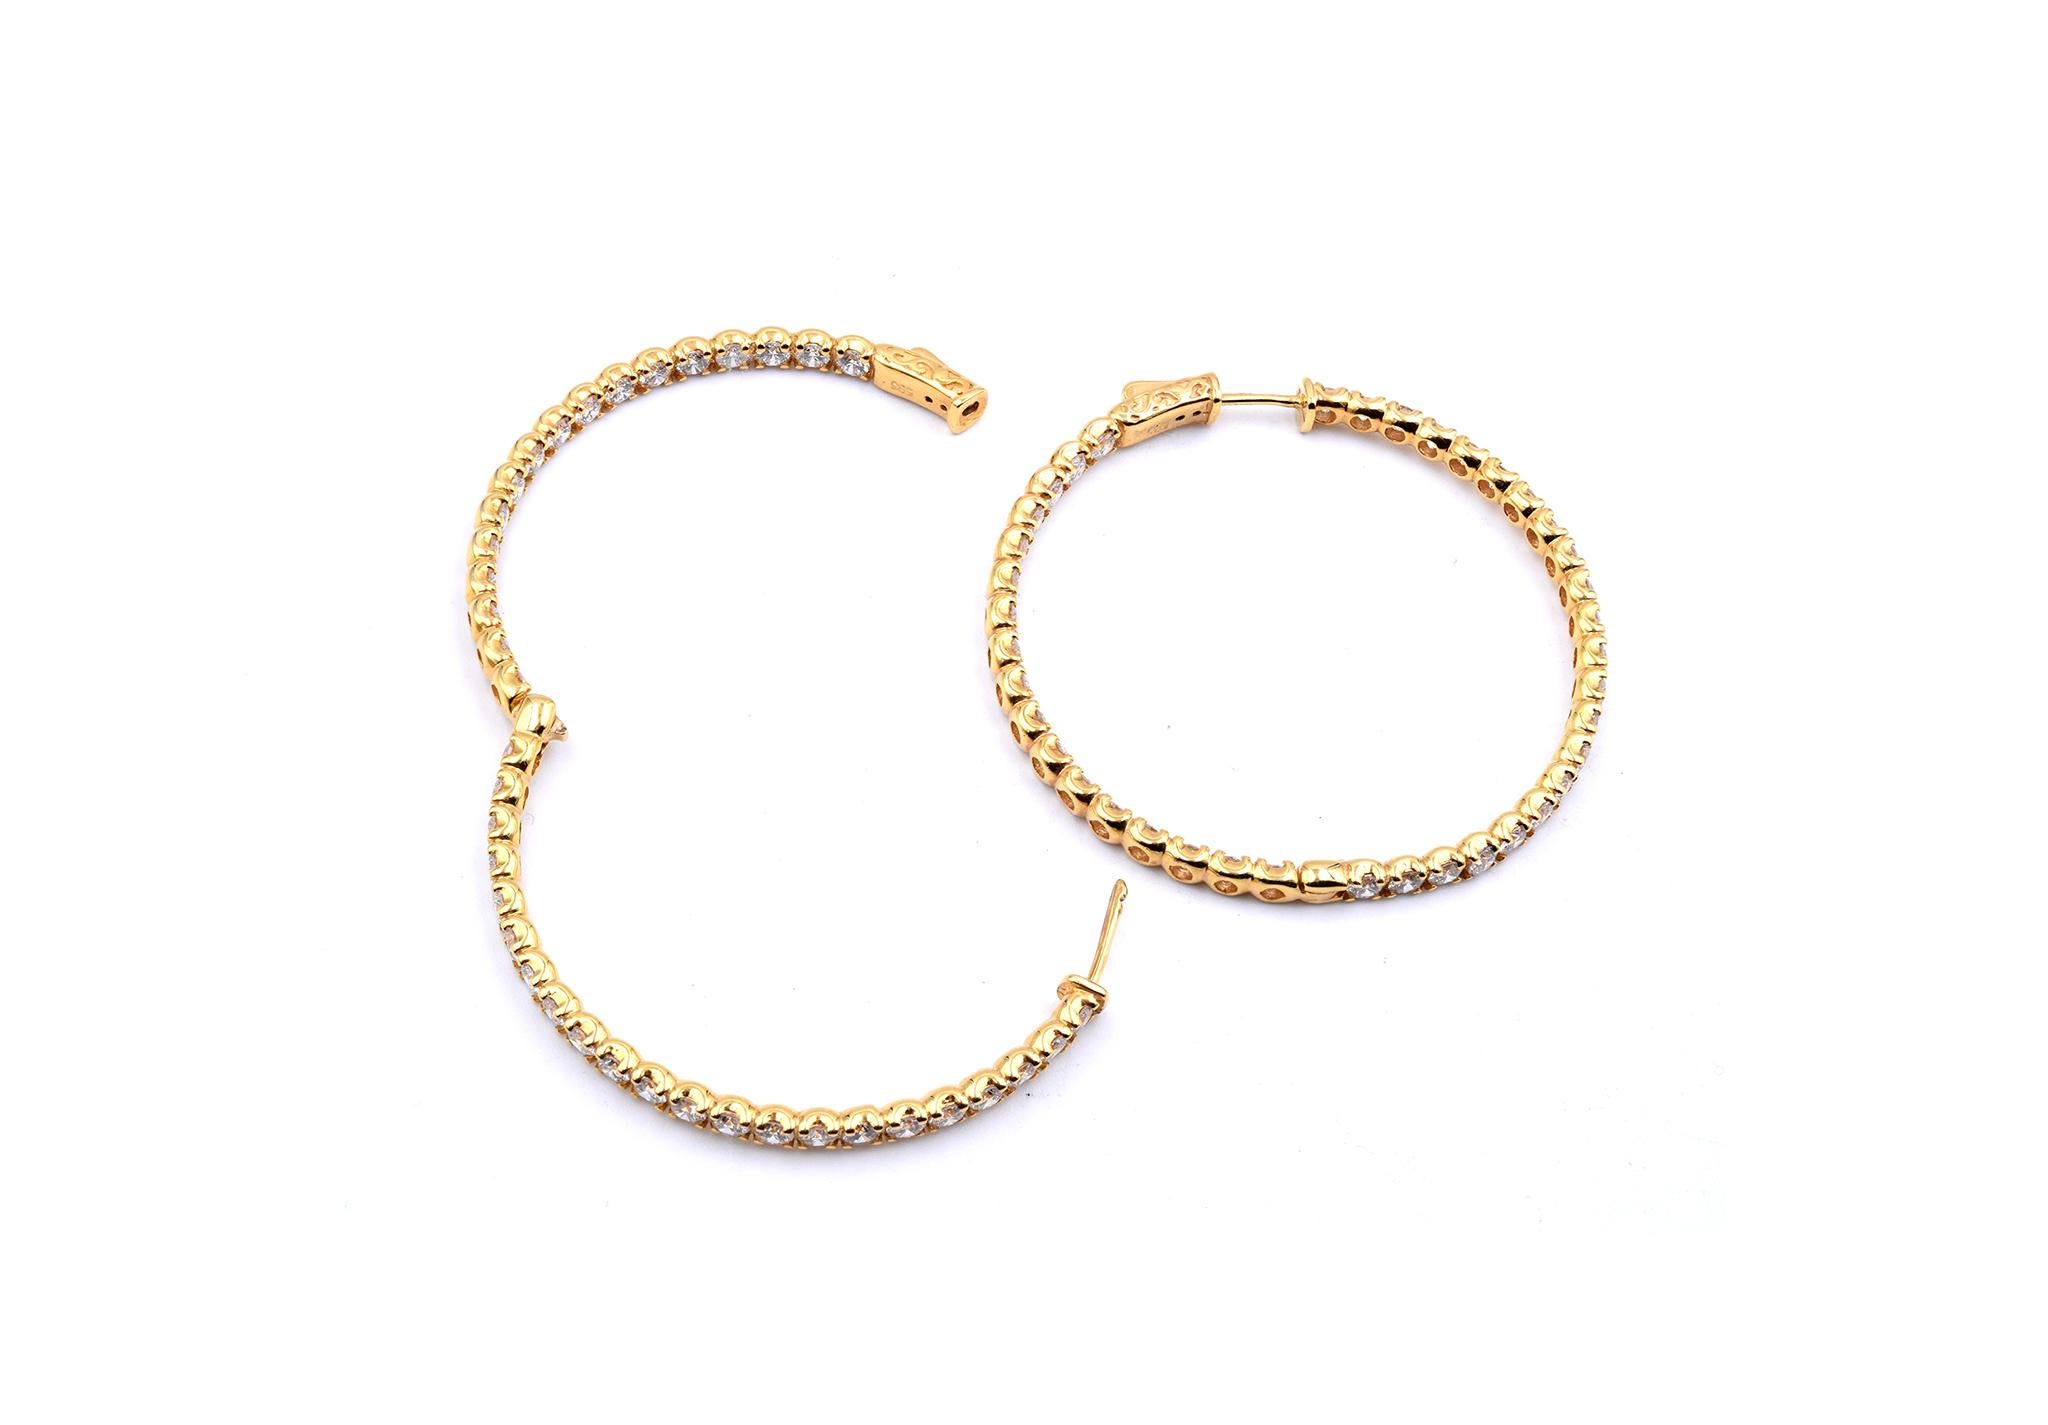 Material: 14K yellow gold
Diamonds: 78 round brilliant cuts = 7.80cttw
Color: G
Clarity: VS
Dimensions: earrings measure 2-inches long 
Fastenings: snap closure with lever
Weight: 15.81 grams